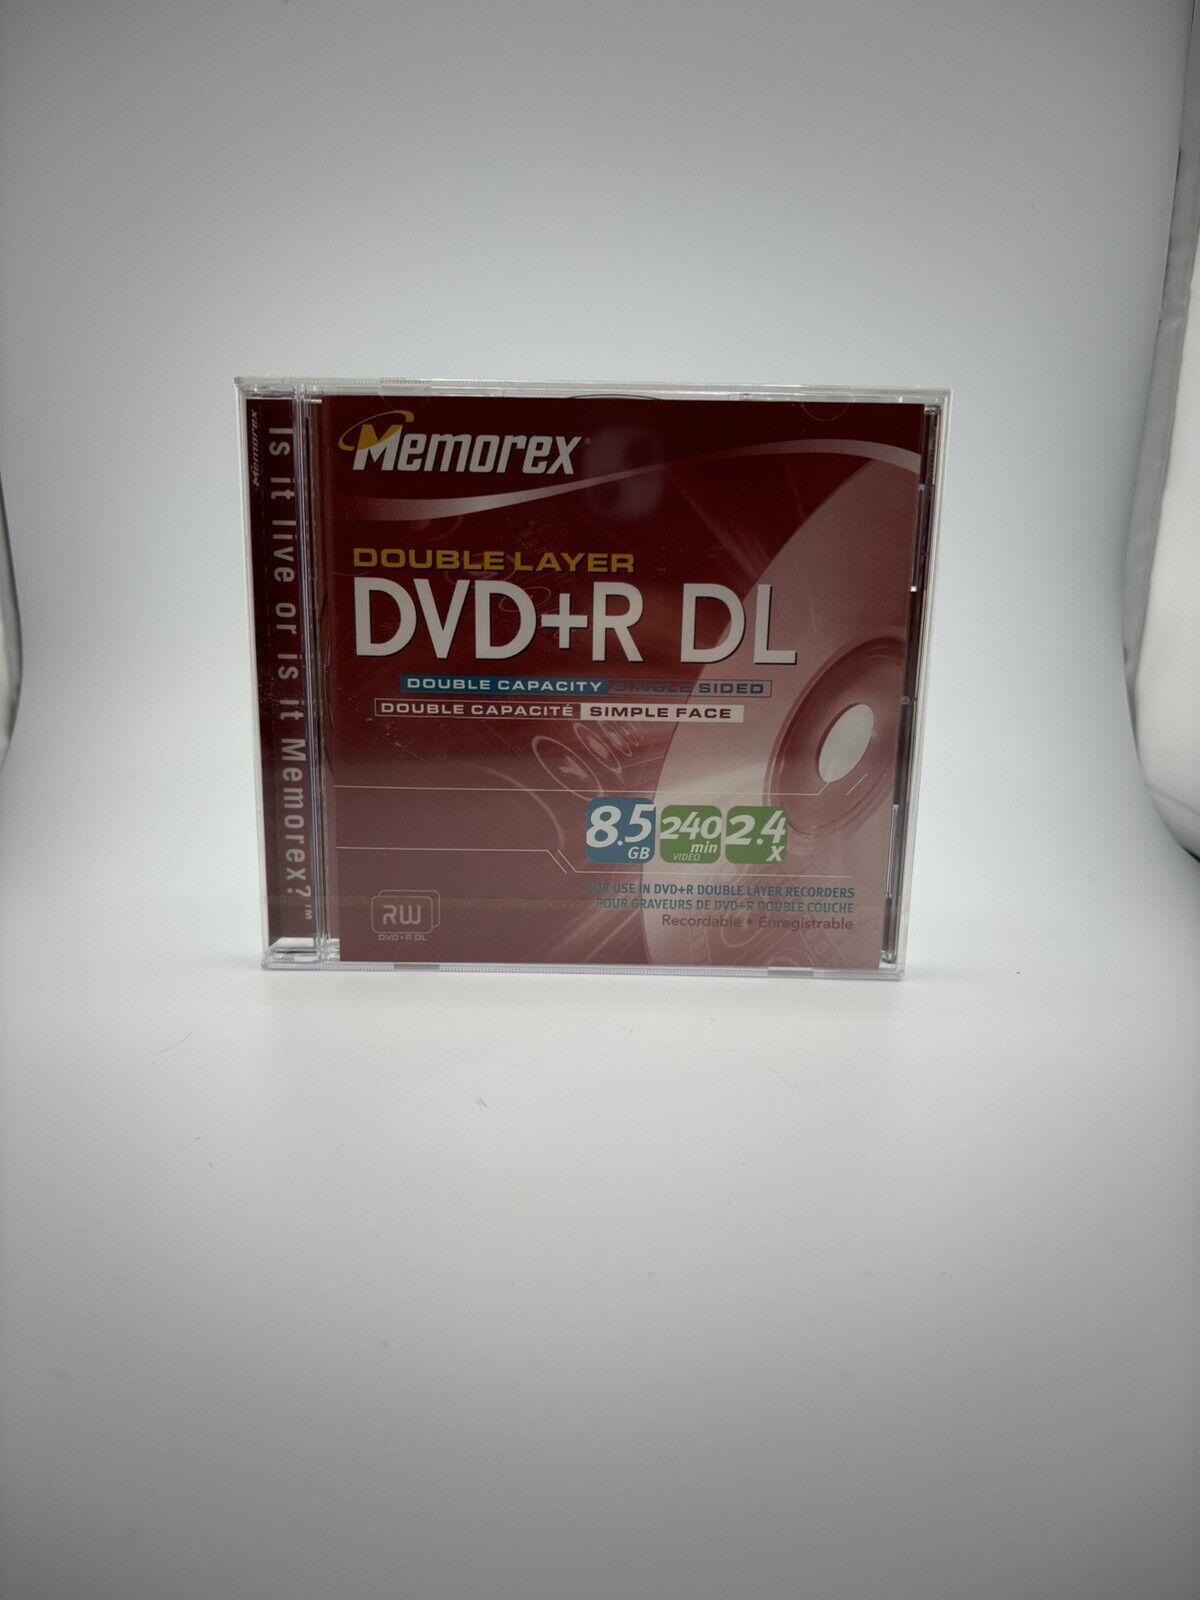 Memorex 2.4x 8.5 GB Double Layer DVD+R DL 2 Pack New Sealed